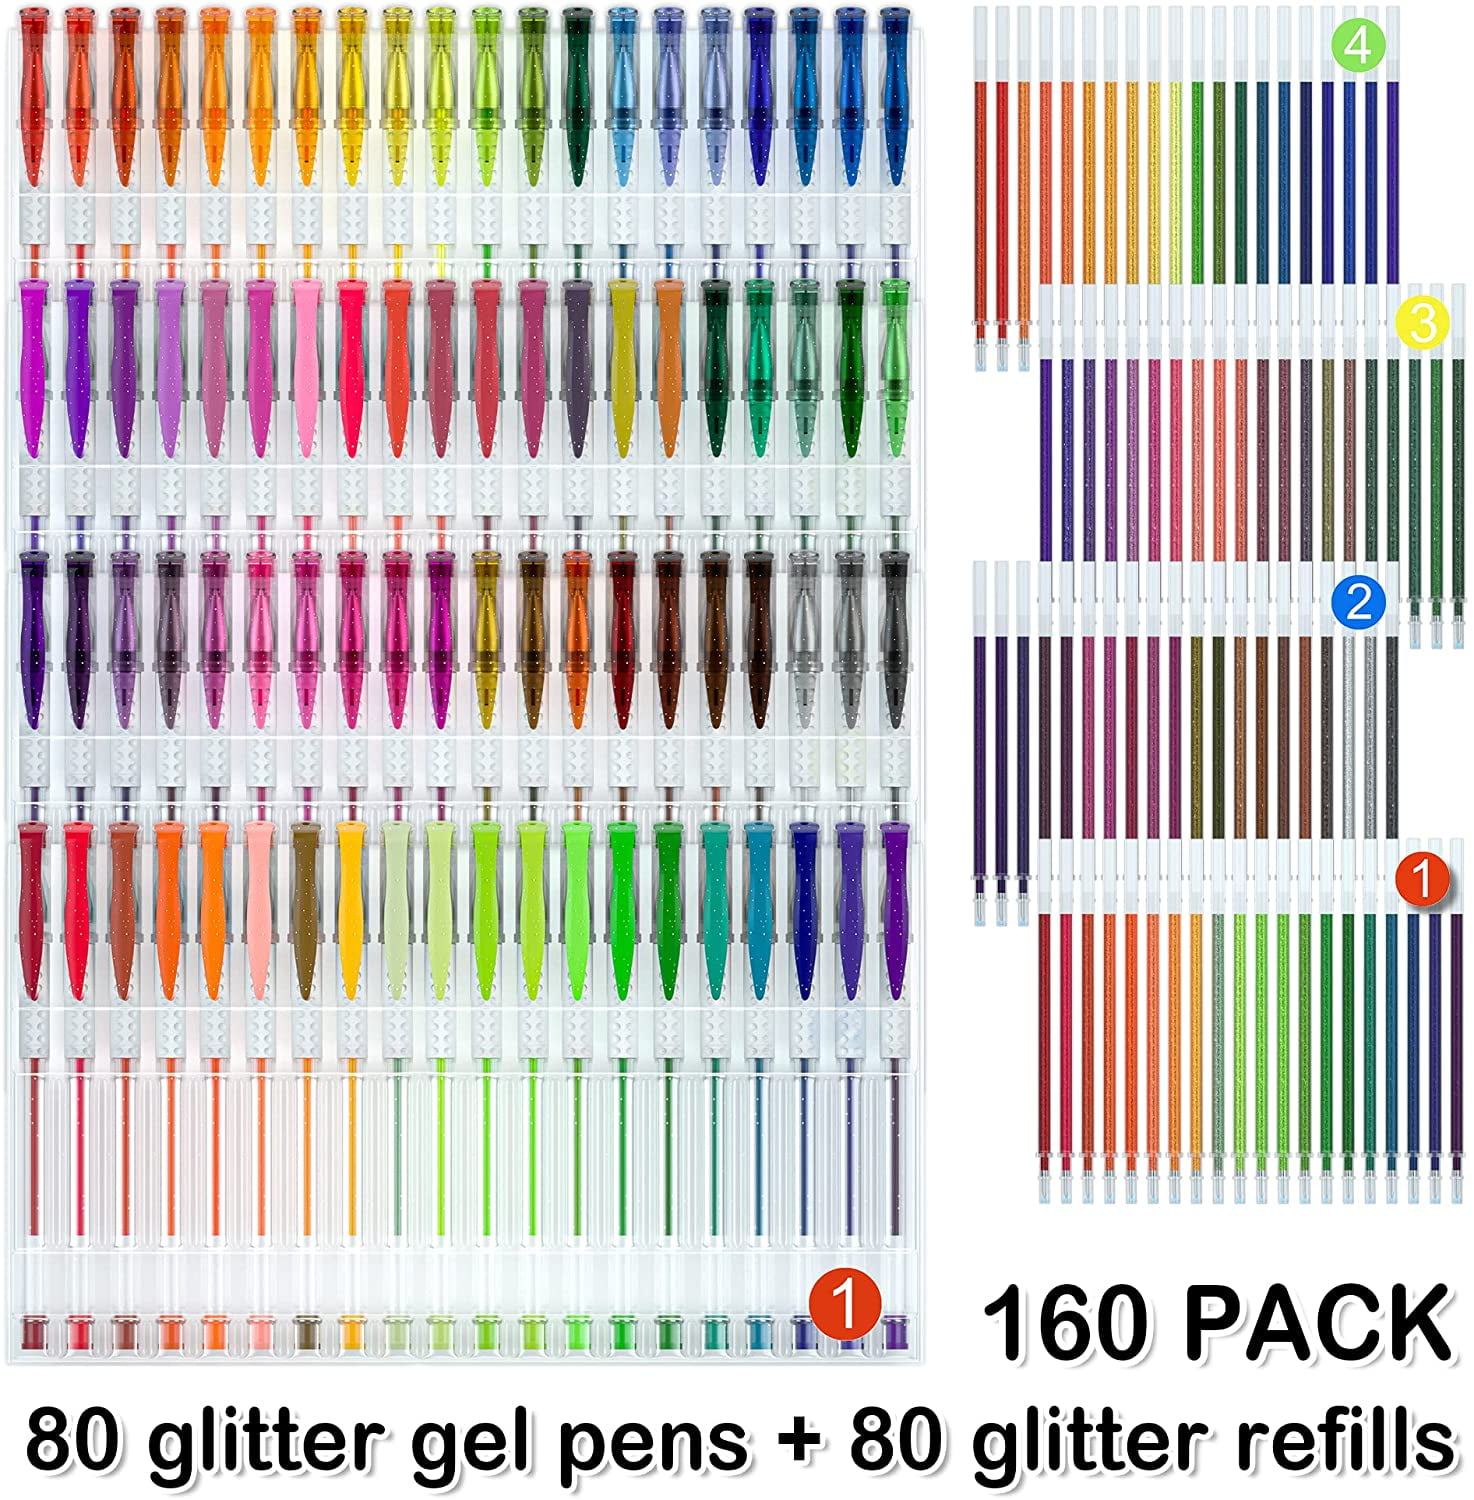 TANMIT 80 Glitter Gel Pens Plus 80 Refill, 36 Gel Pens for Adult Coloring  Books